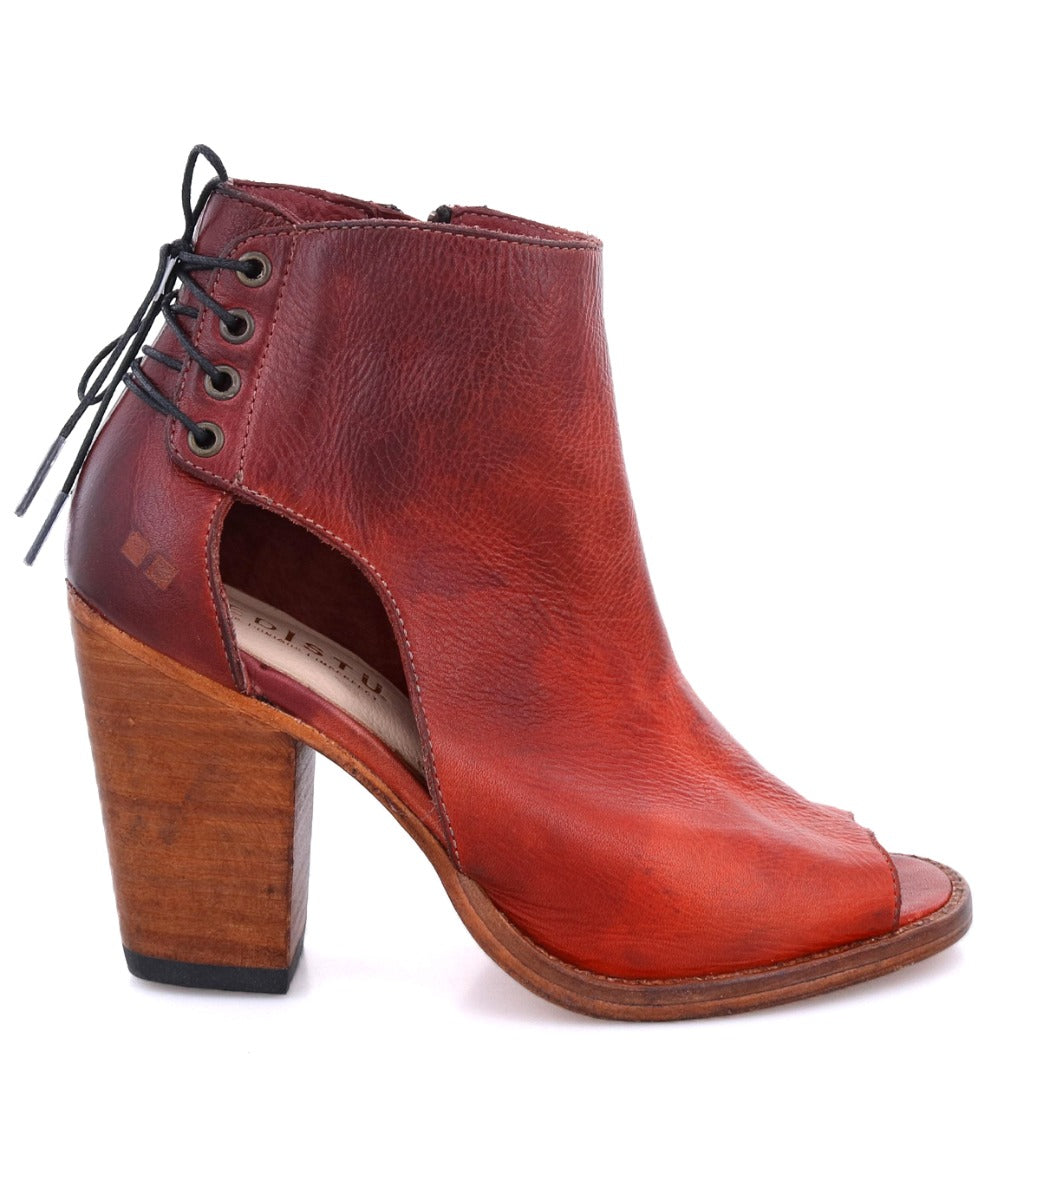 An Angelique ankle boot with wooden heel by Bed Stu.